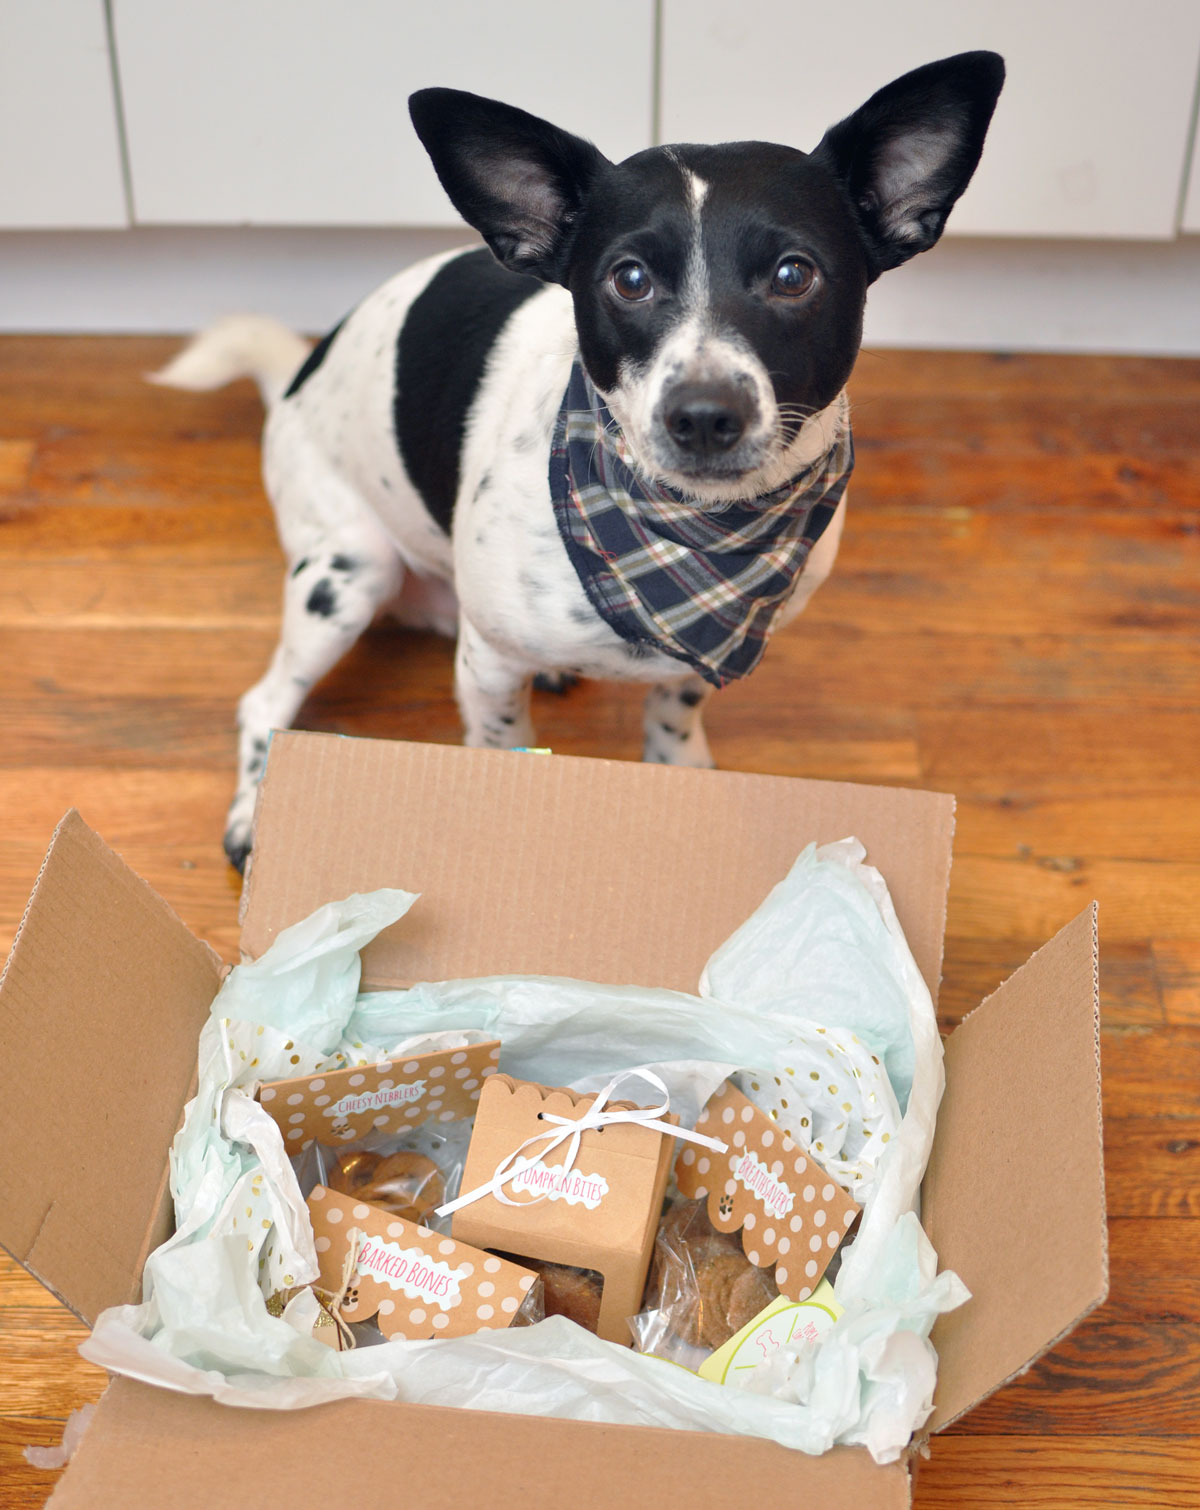 Today's Small Business Spotlight highlights Pupcake Confections, a new bakery for dogs started by Victoria Vargas, a pastry chef in Miami, Florida. Victoria sent Henry a box of goodies to try a few weeks ago, and he loved them so much that I invited her to interview for the blog!